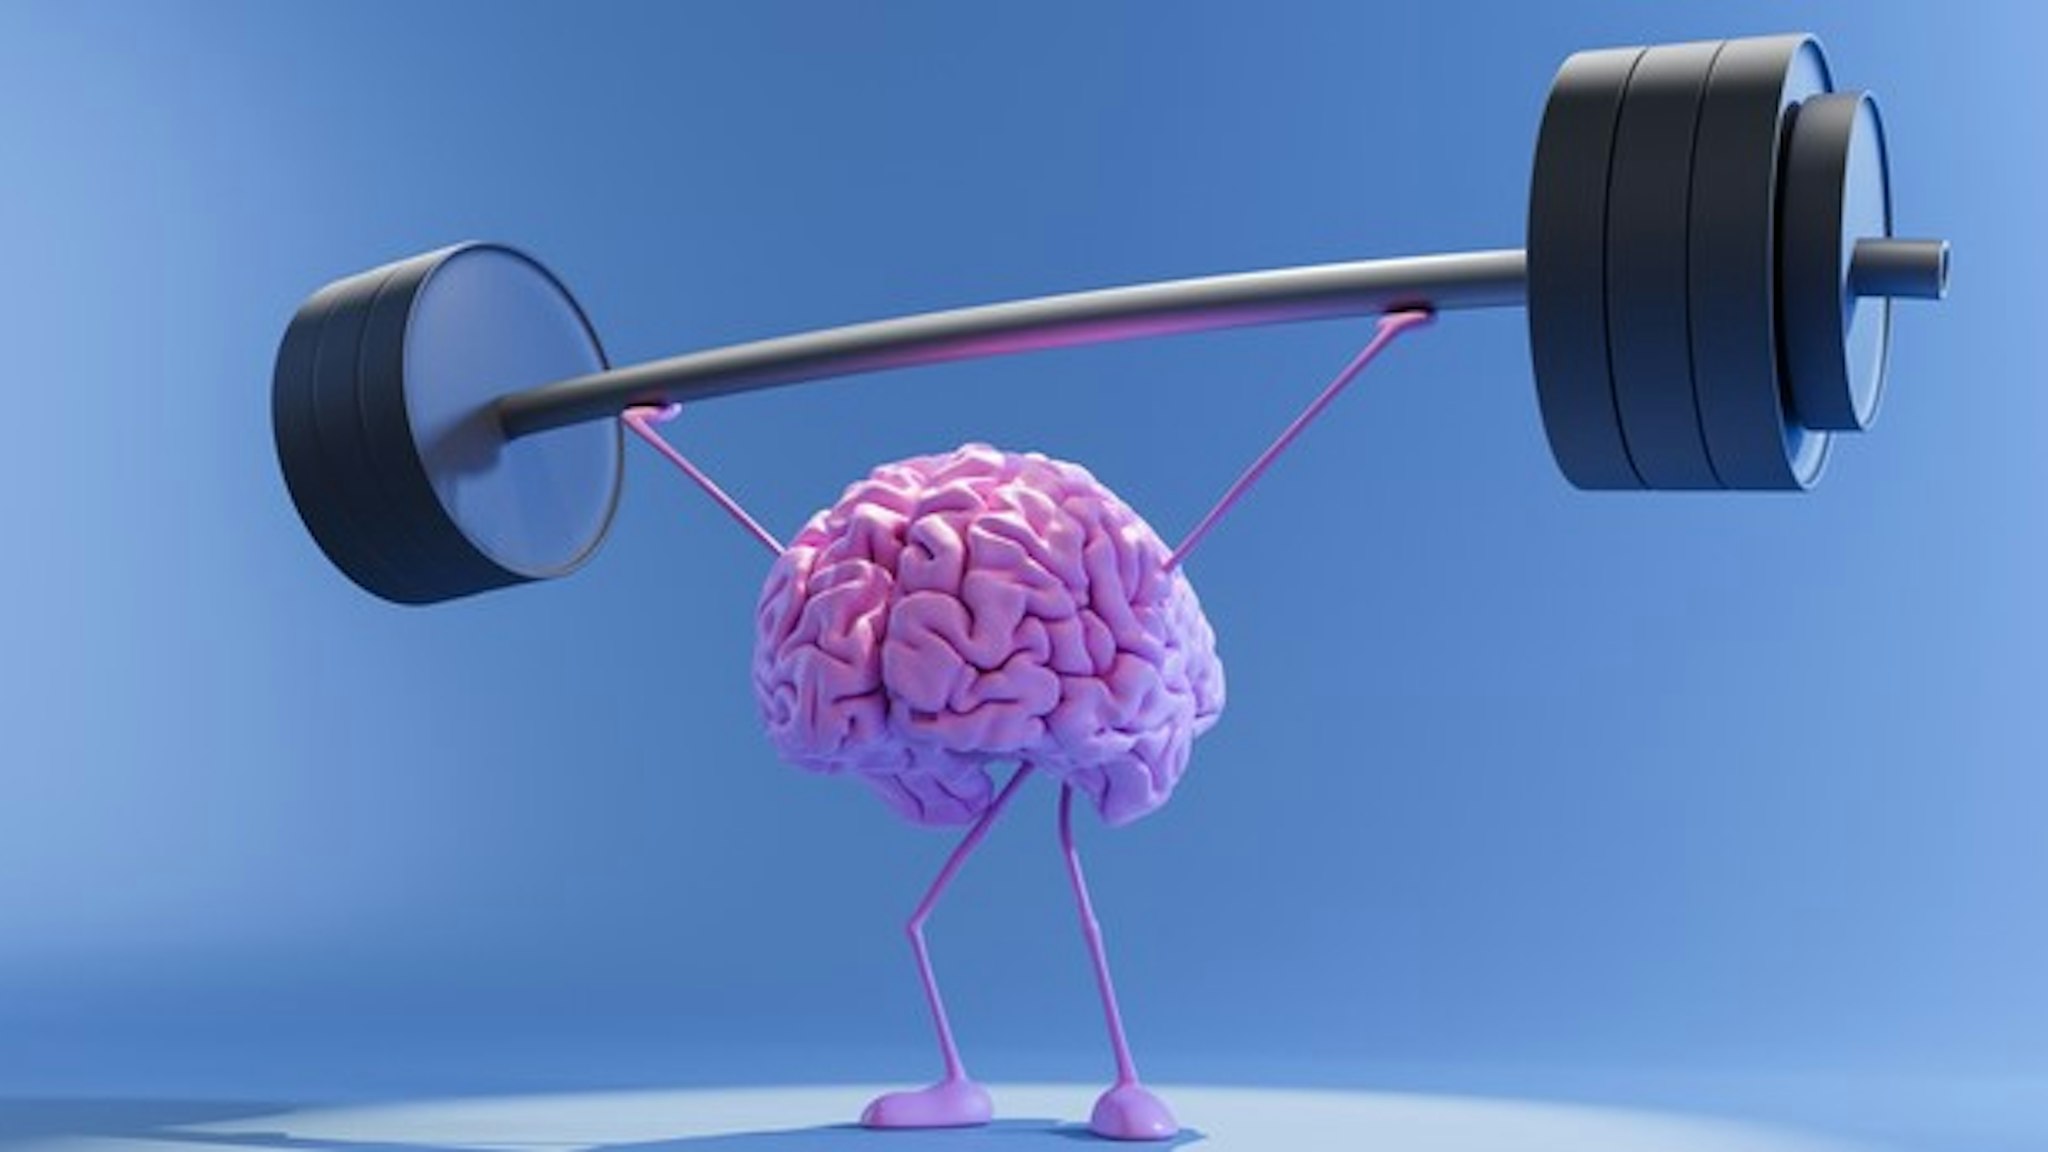 3D illustration of pink color human brain lifting heavy barbell. Training mind and mental health concept. Train your brain